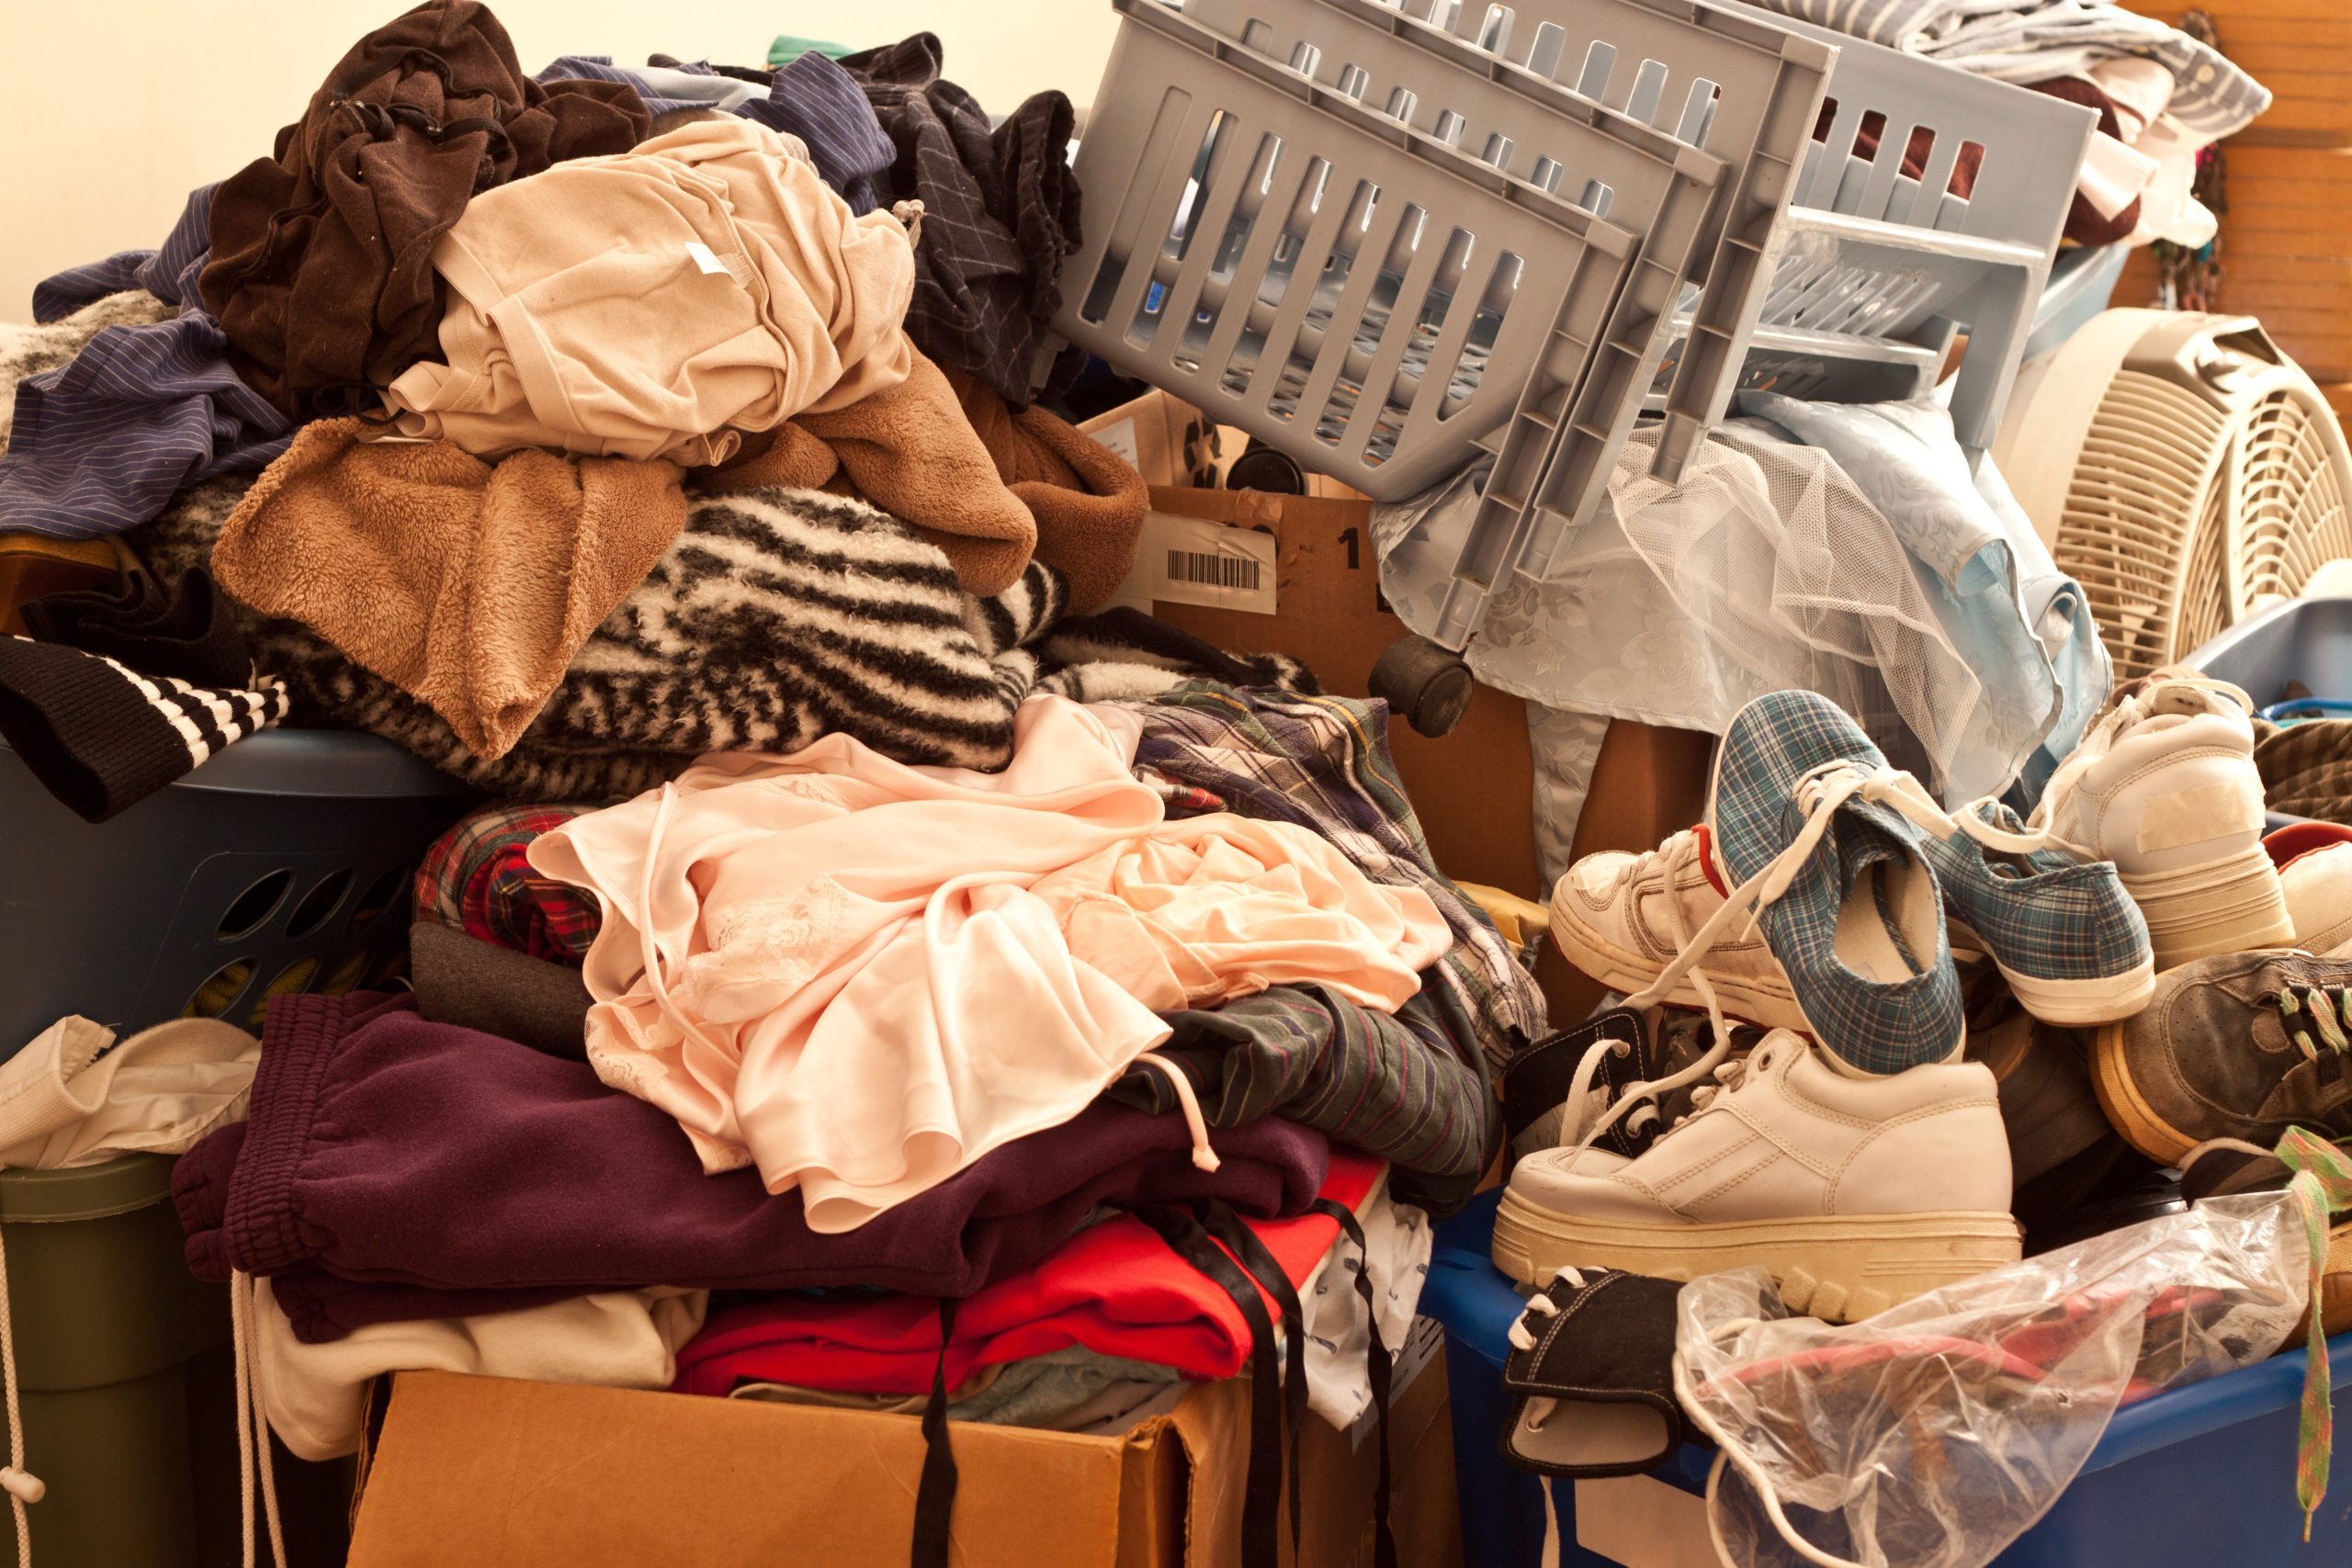 faq - How can hoarding disorder be treated? - the junk guys